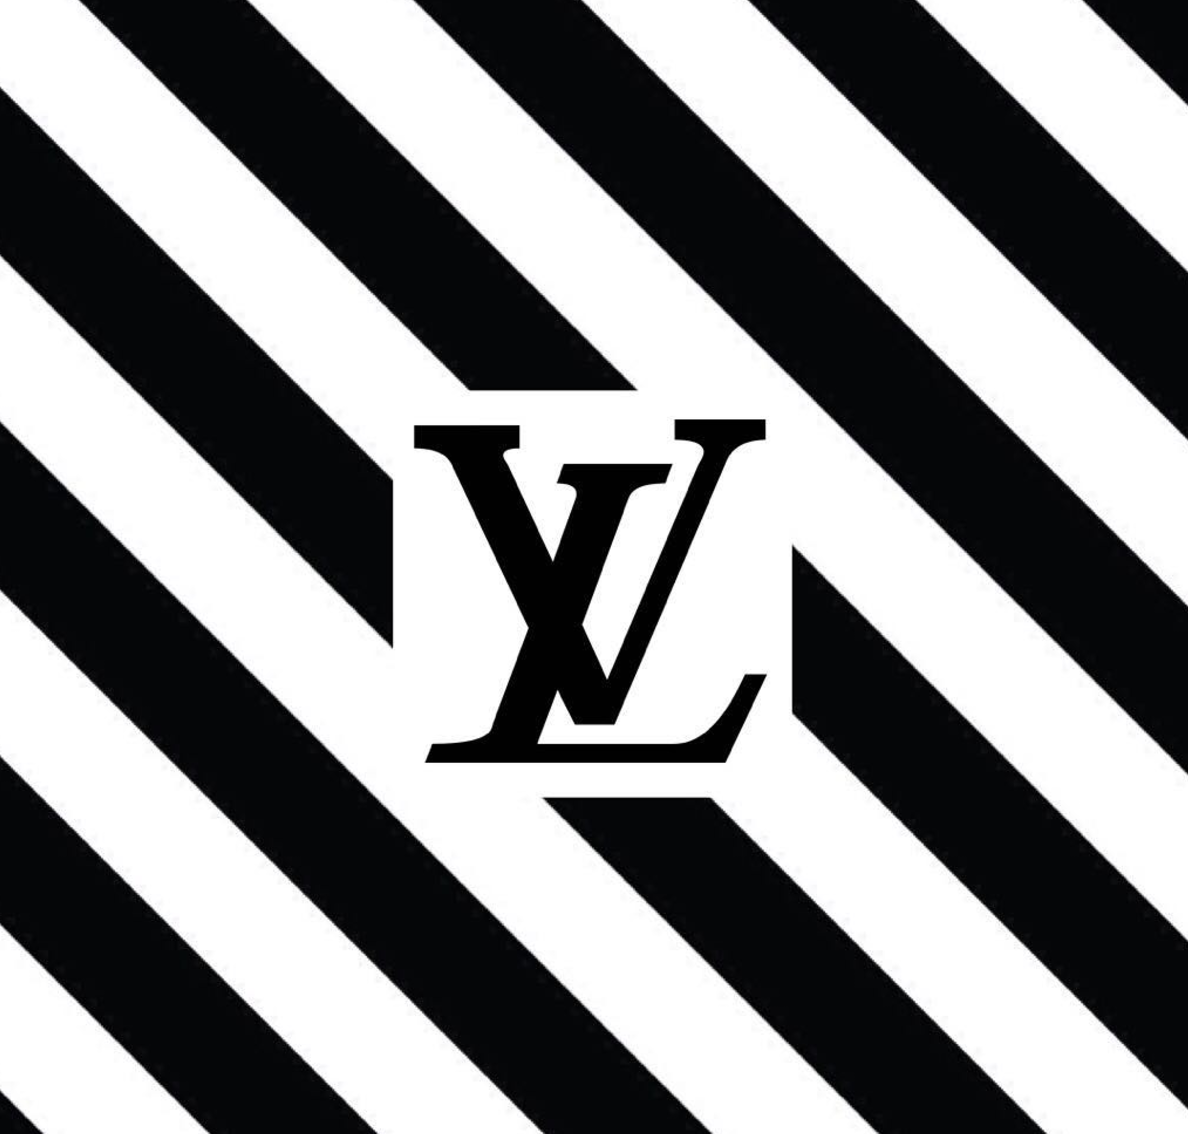 An OFF-WHITE x Louis Vuitton Collaboration May Be Coming – PAUSE